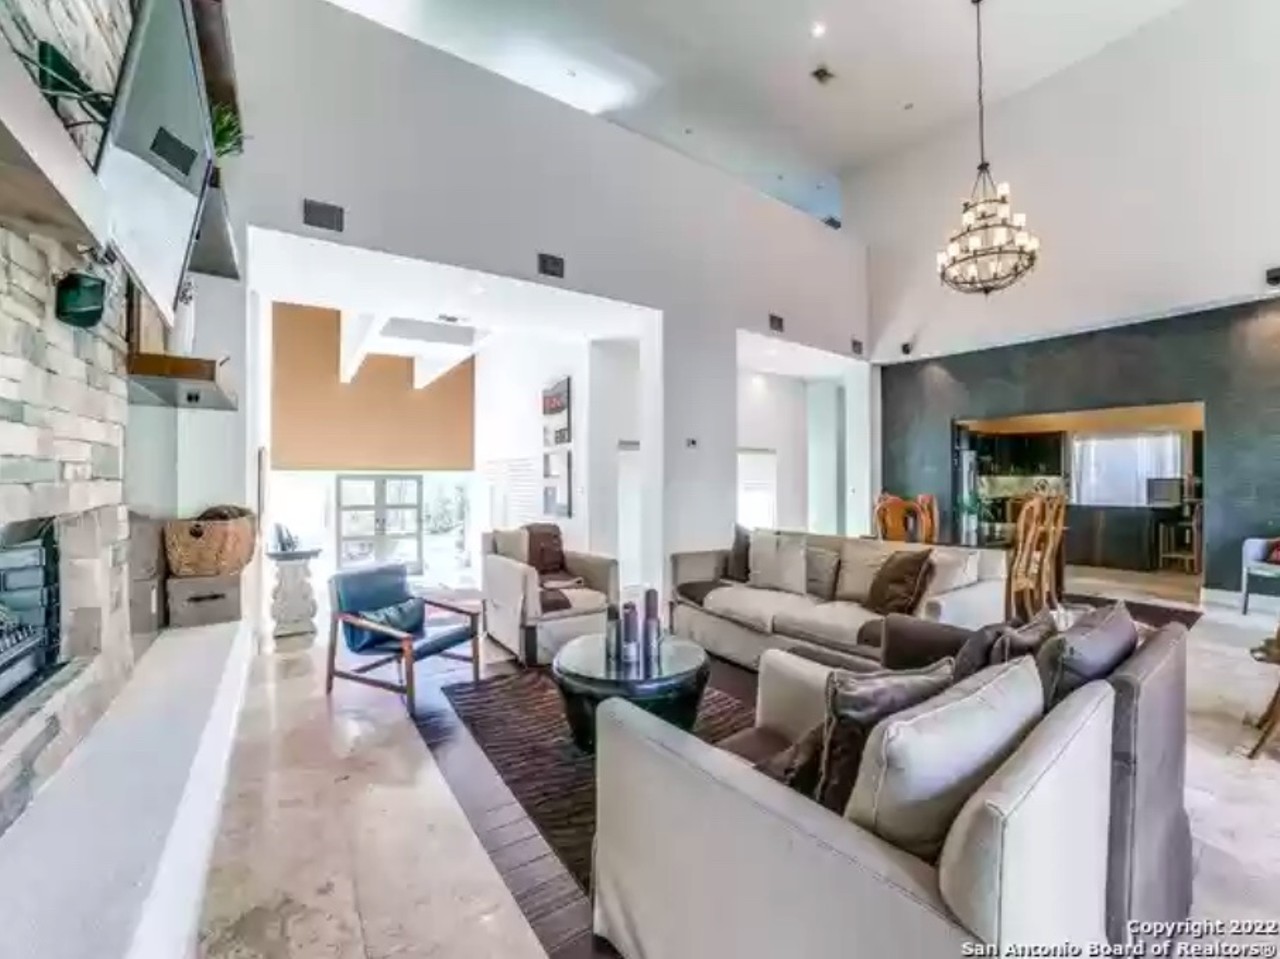 A home for sale in San Antonio's Dominion development features contemporary Mexican-style design